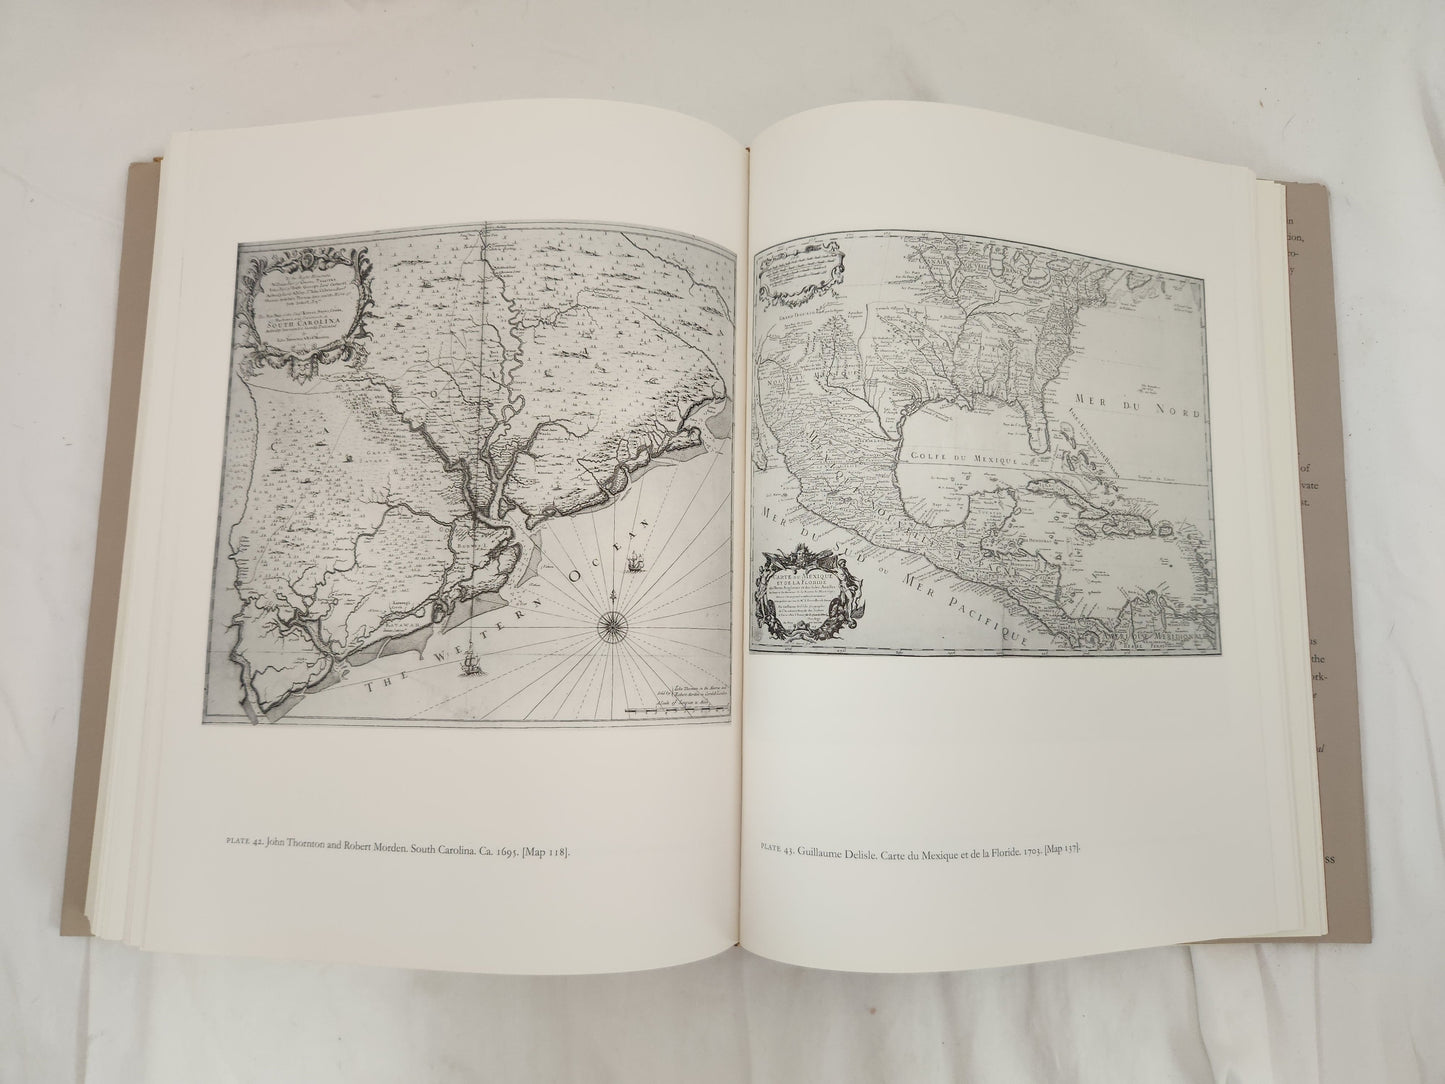 The Southeast In Early Maps by William P. Cumming 3rd Edition (1998)